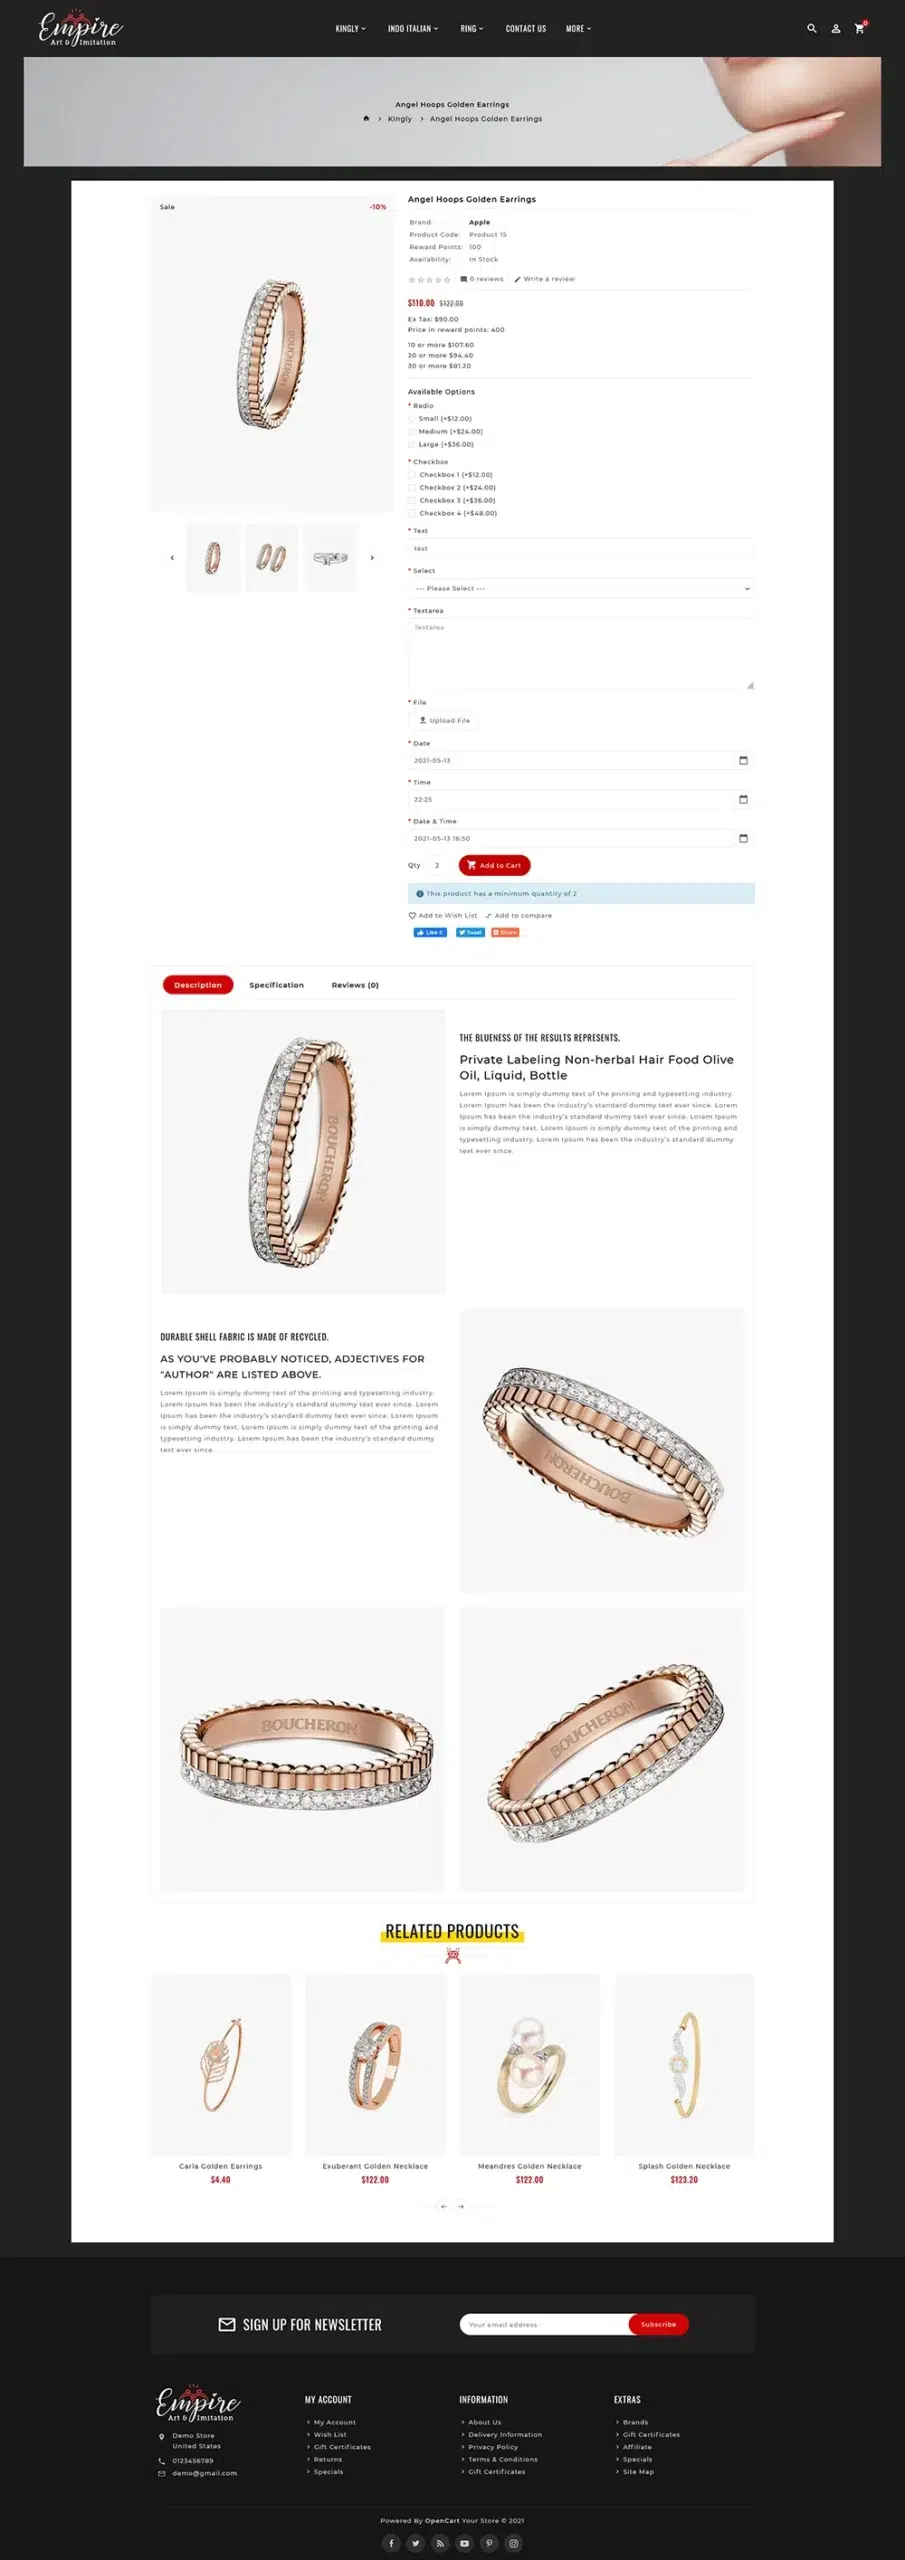 Empire - art & imitation - OpenCart Theme for Online Jewelry Store